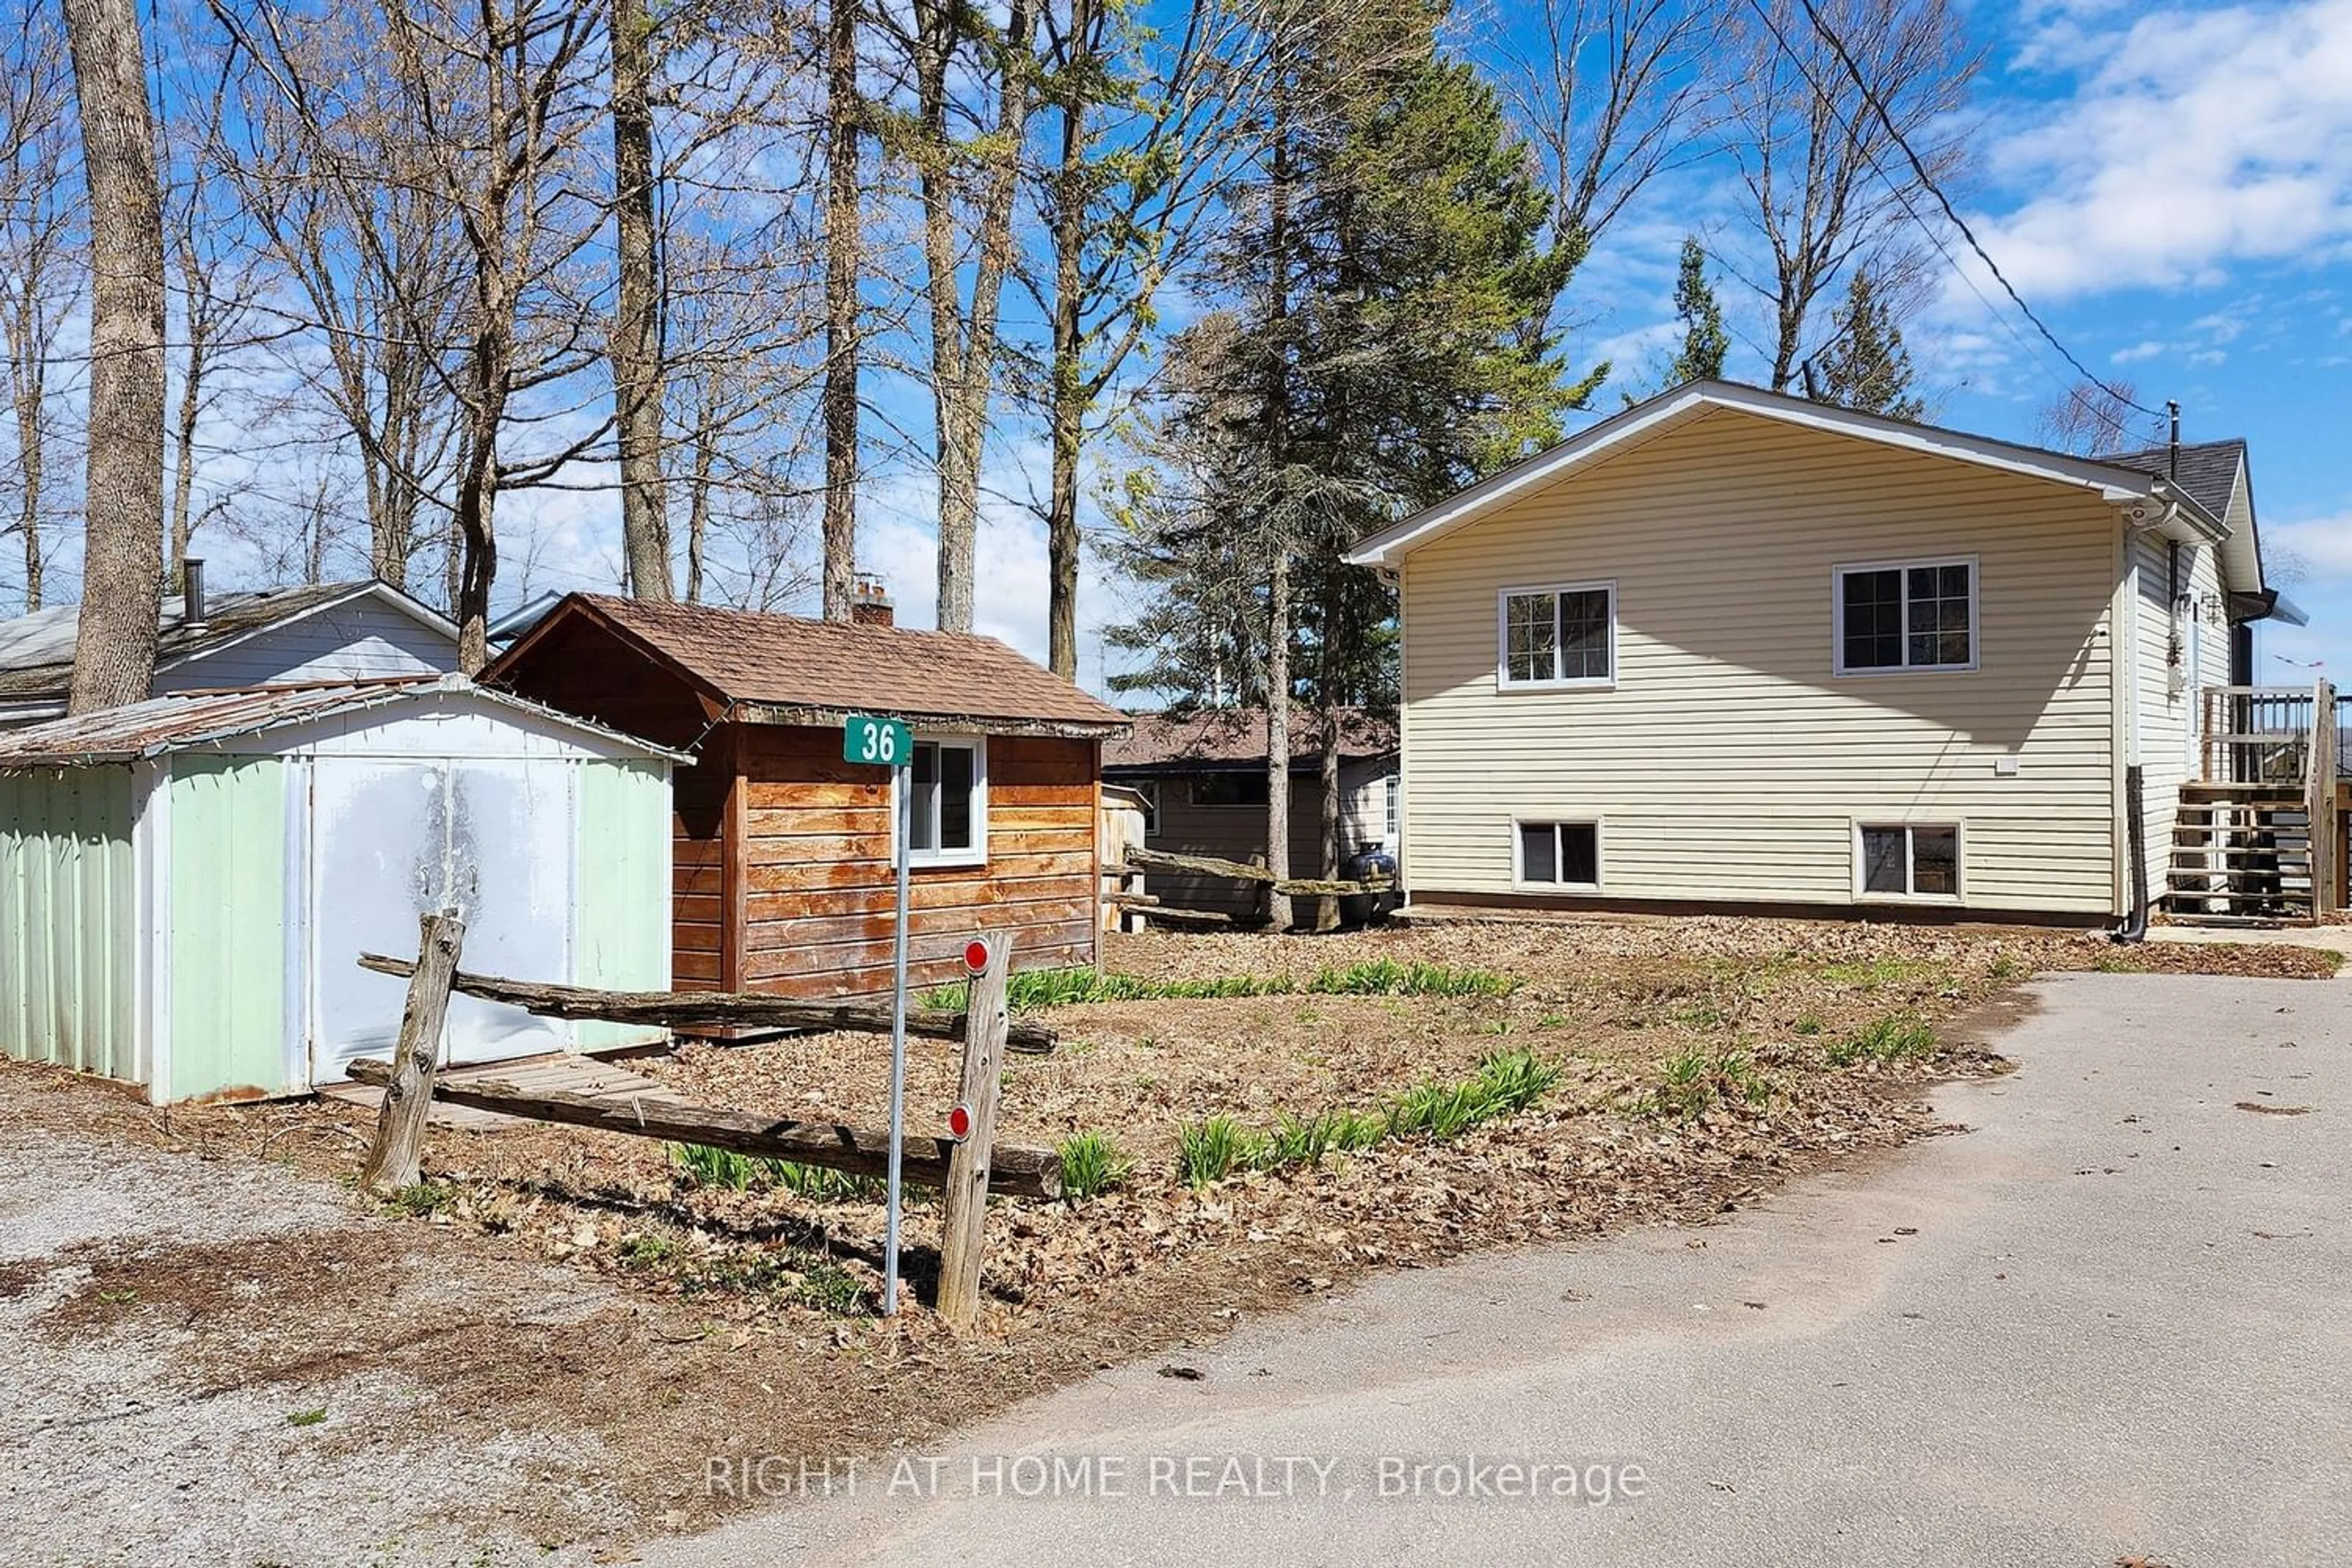 Frontside or backside of a home for 36 Hills Rd, Kawartha Lakes Ontario K0M 1A0